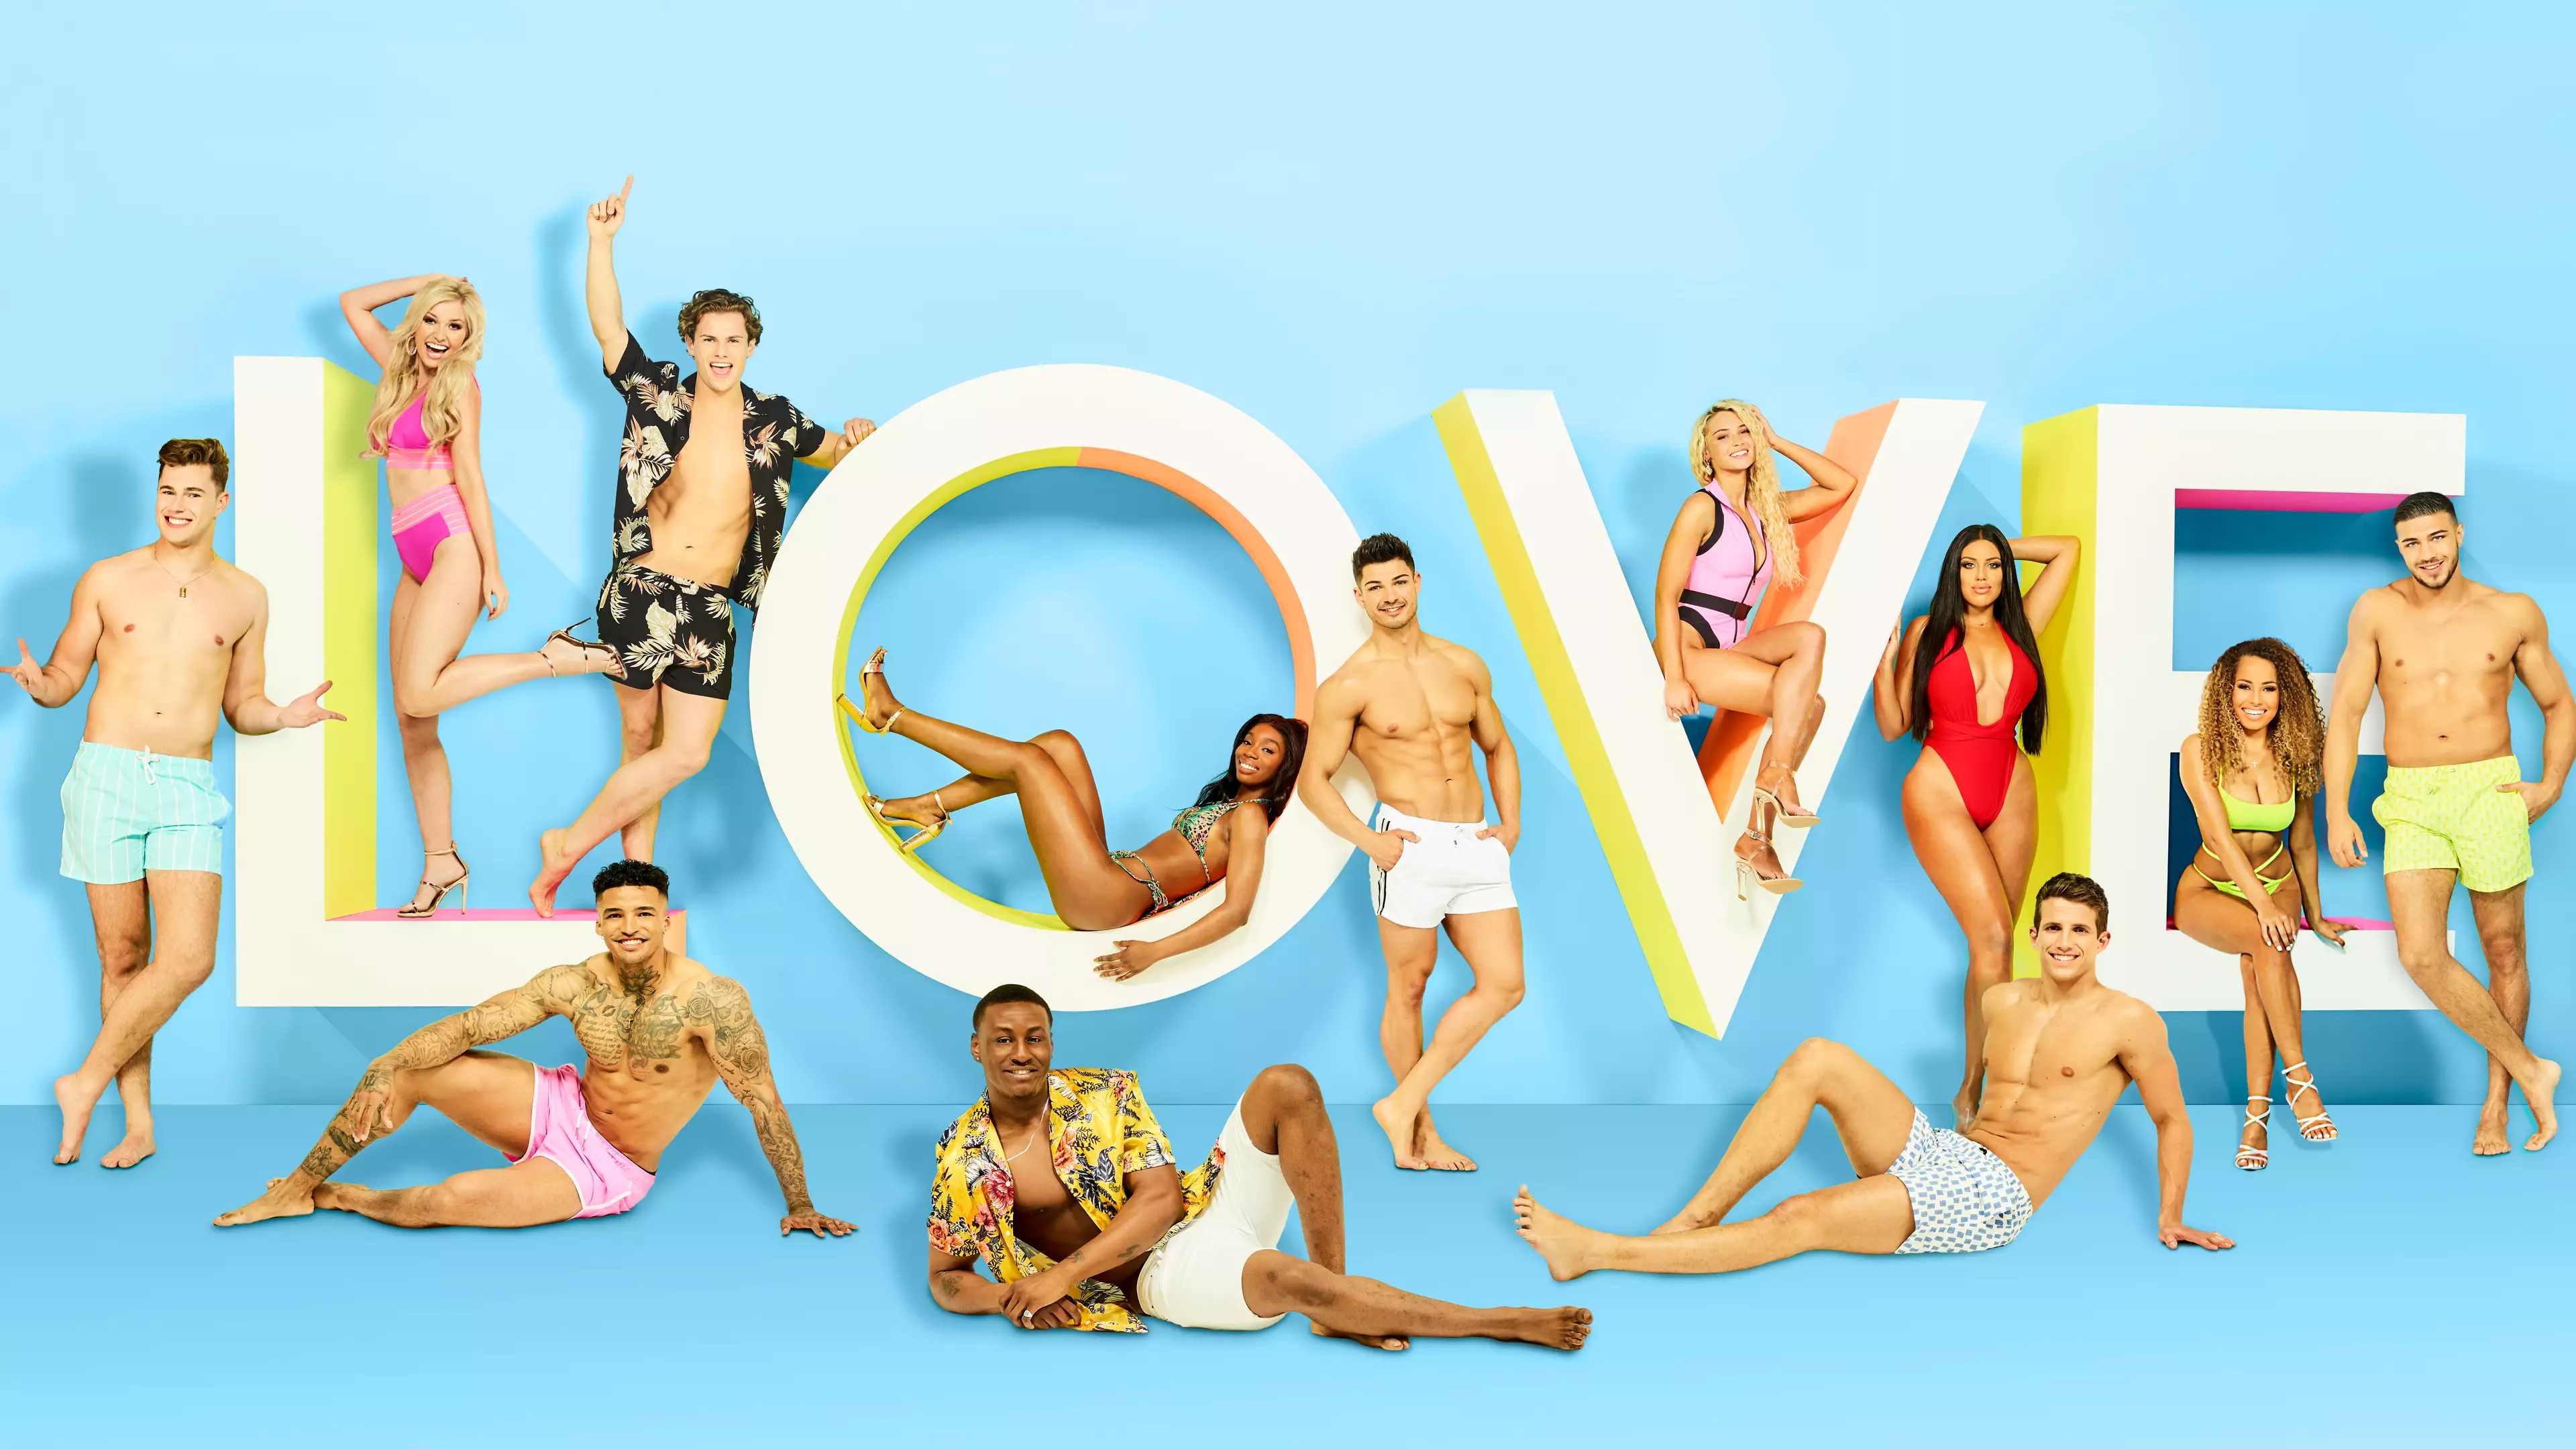 ITV Confirms There Will Be Two Series Of 'Love Island' Next Year